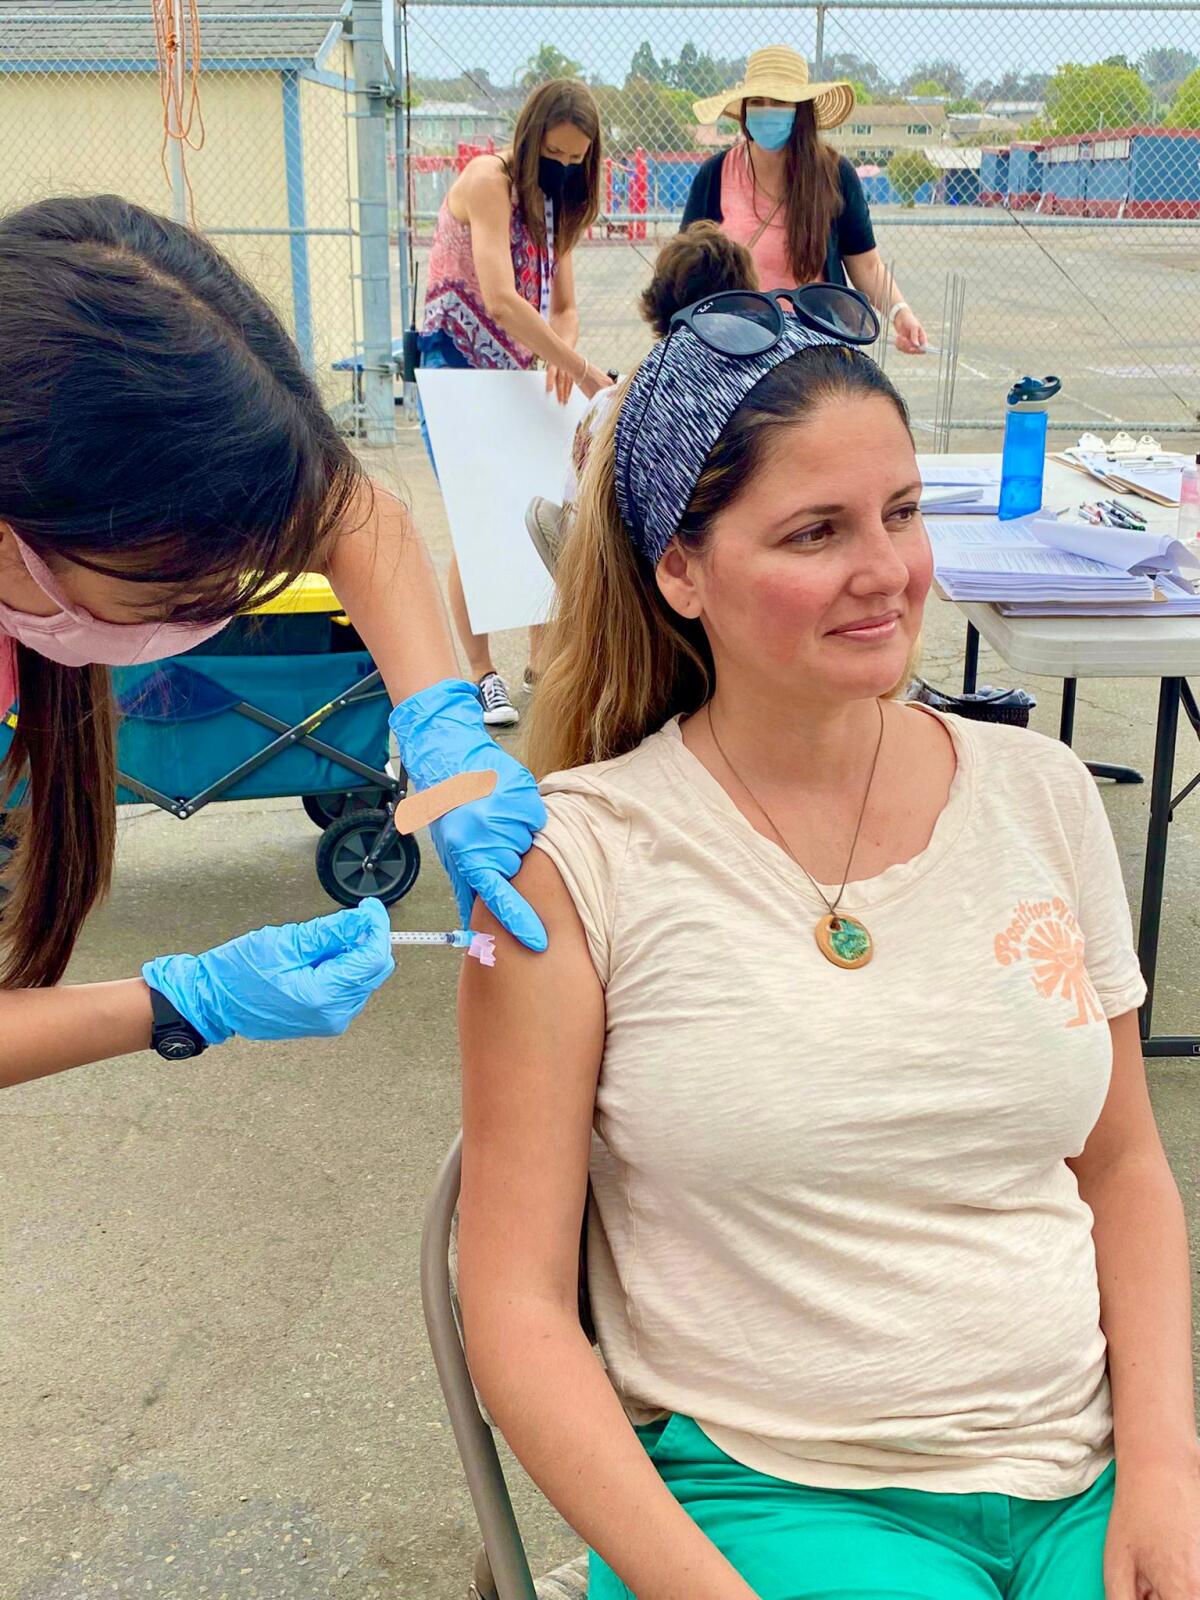 Champions for Health and San Diego County sponsored a COVID-19 vaccination event in La Jolla in July and will again Nov. 7.